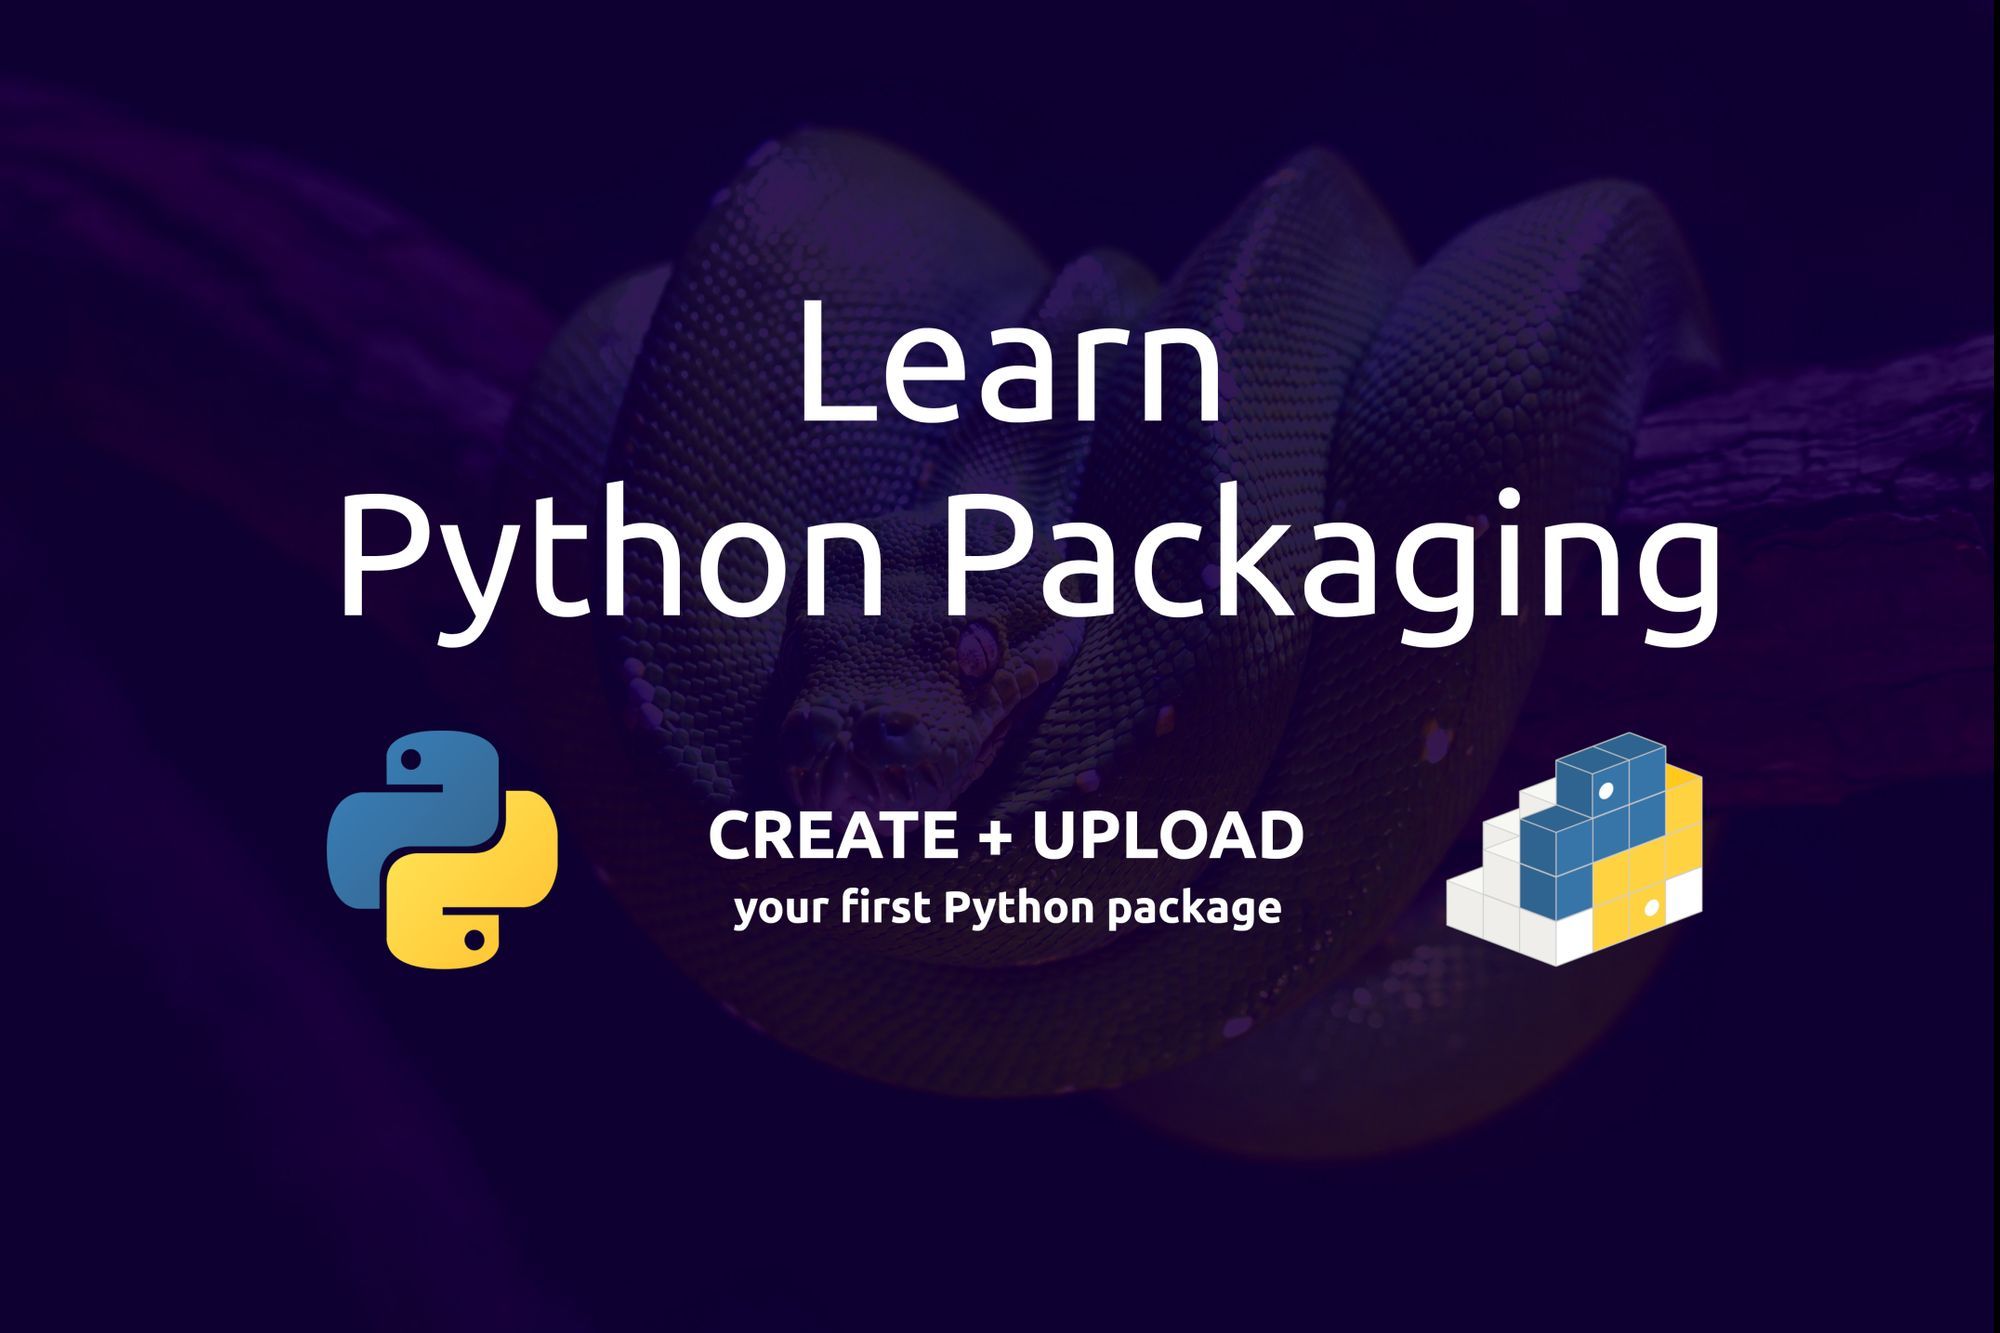 How to Create and Upload Your First Python Package to PyPI